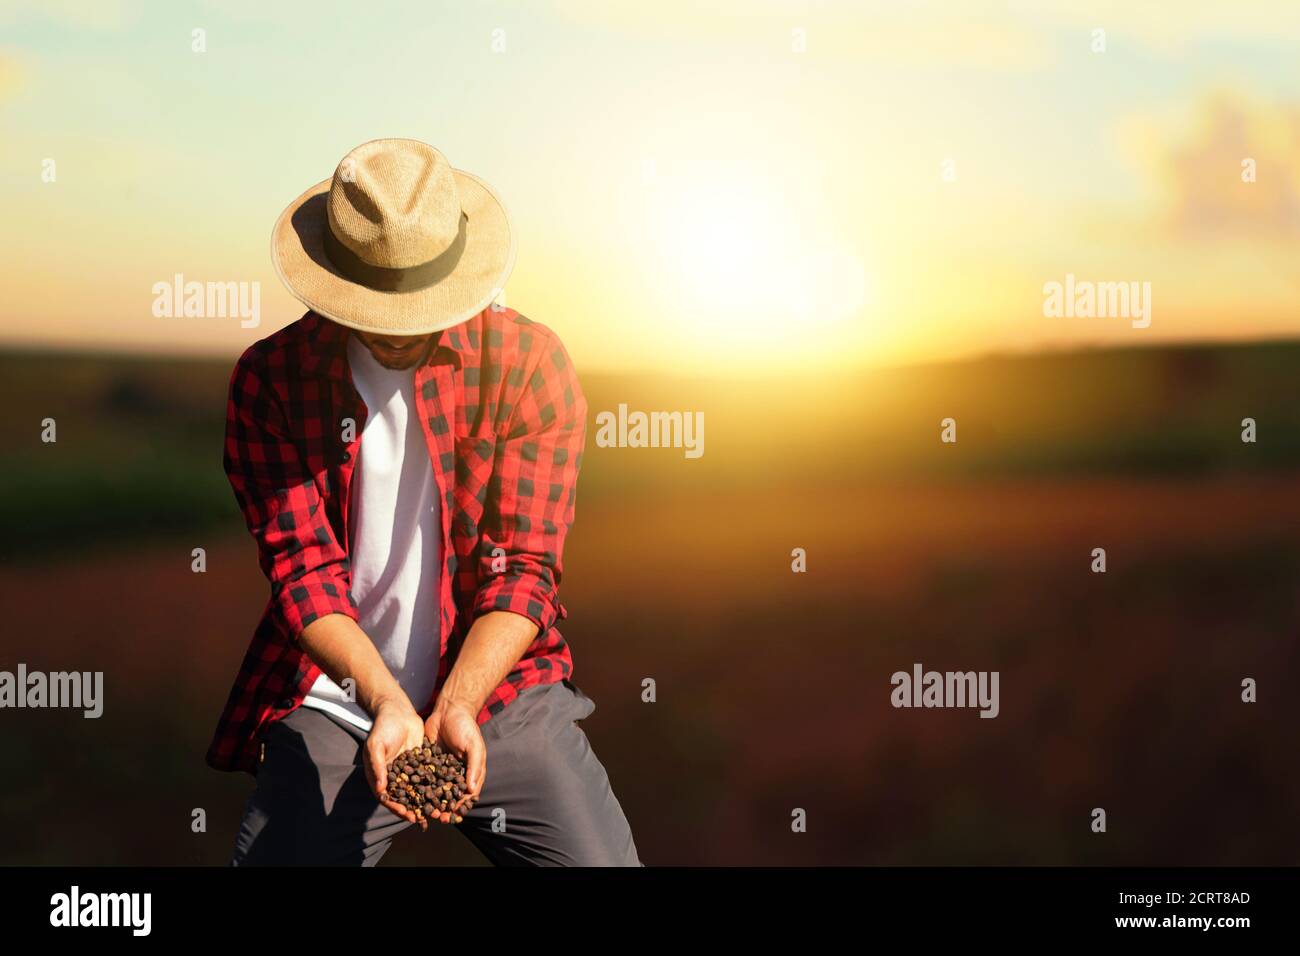 Farmer at sunset outdoor . Man with hat in a sunset blurry background. Space for text. Stock Photo